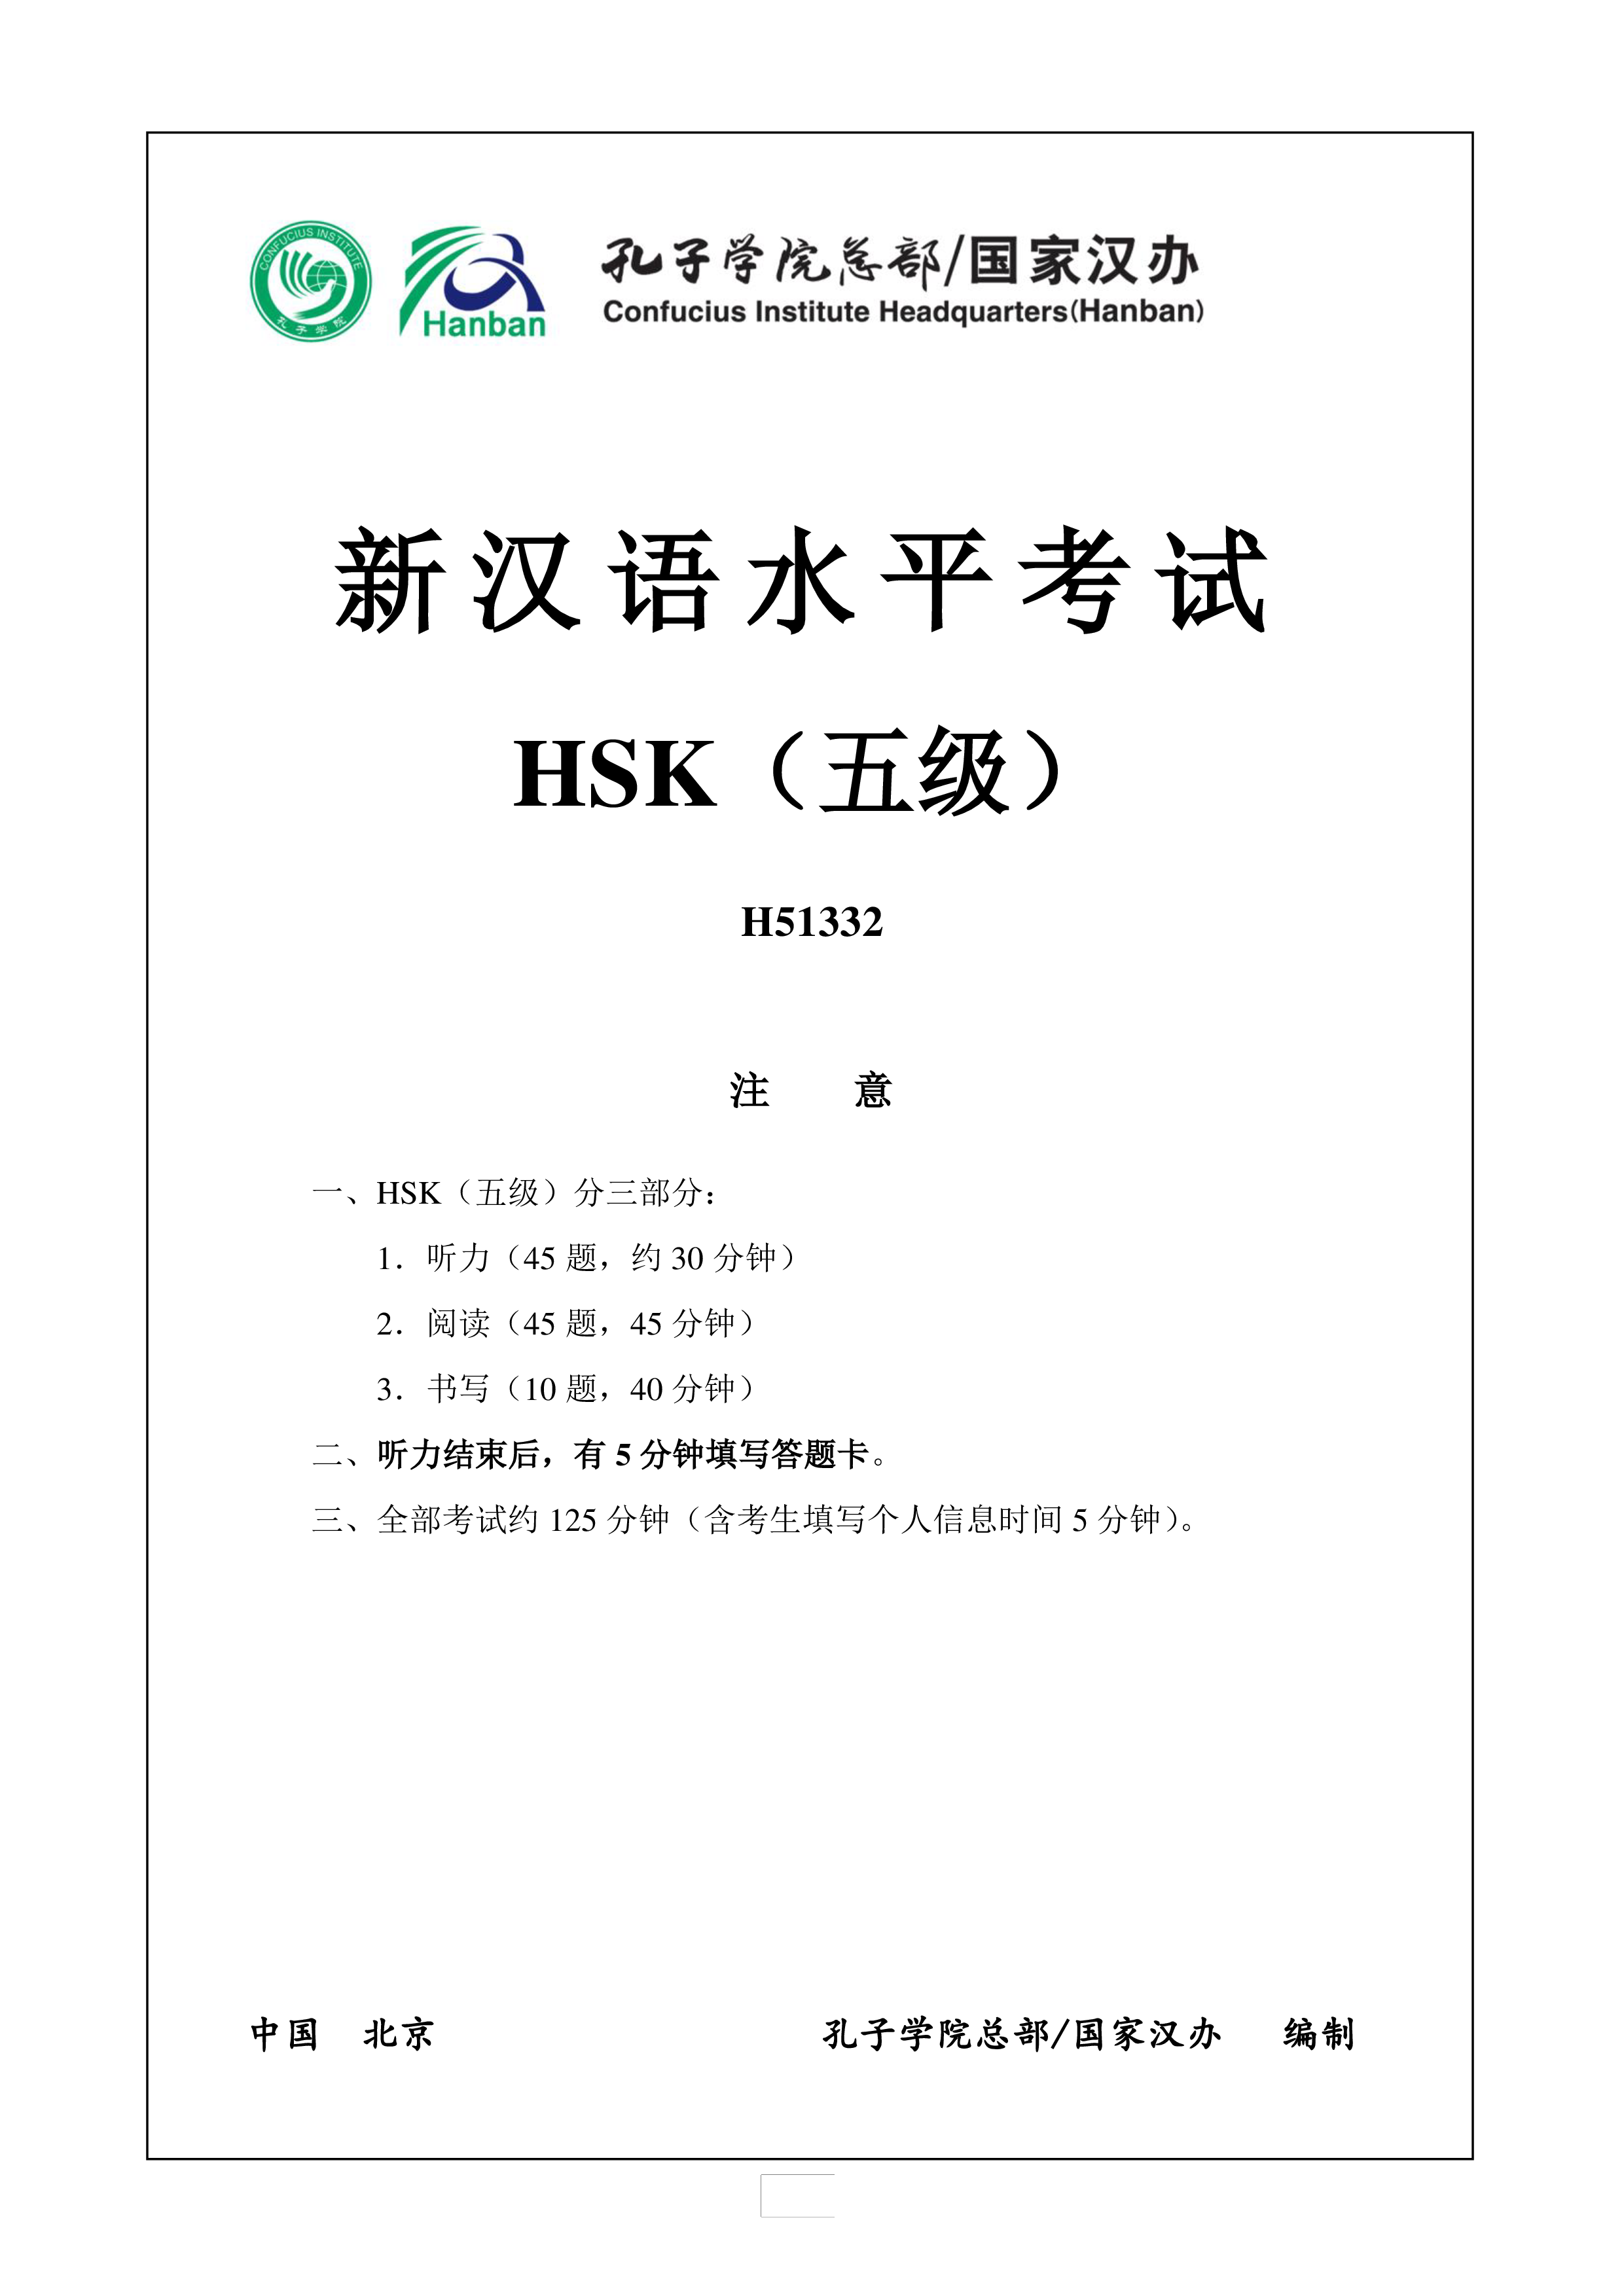 hsk5 chinese exam, incl audio and answer # h51332 template